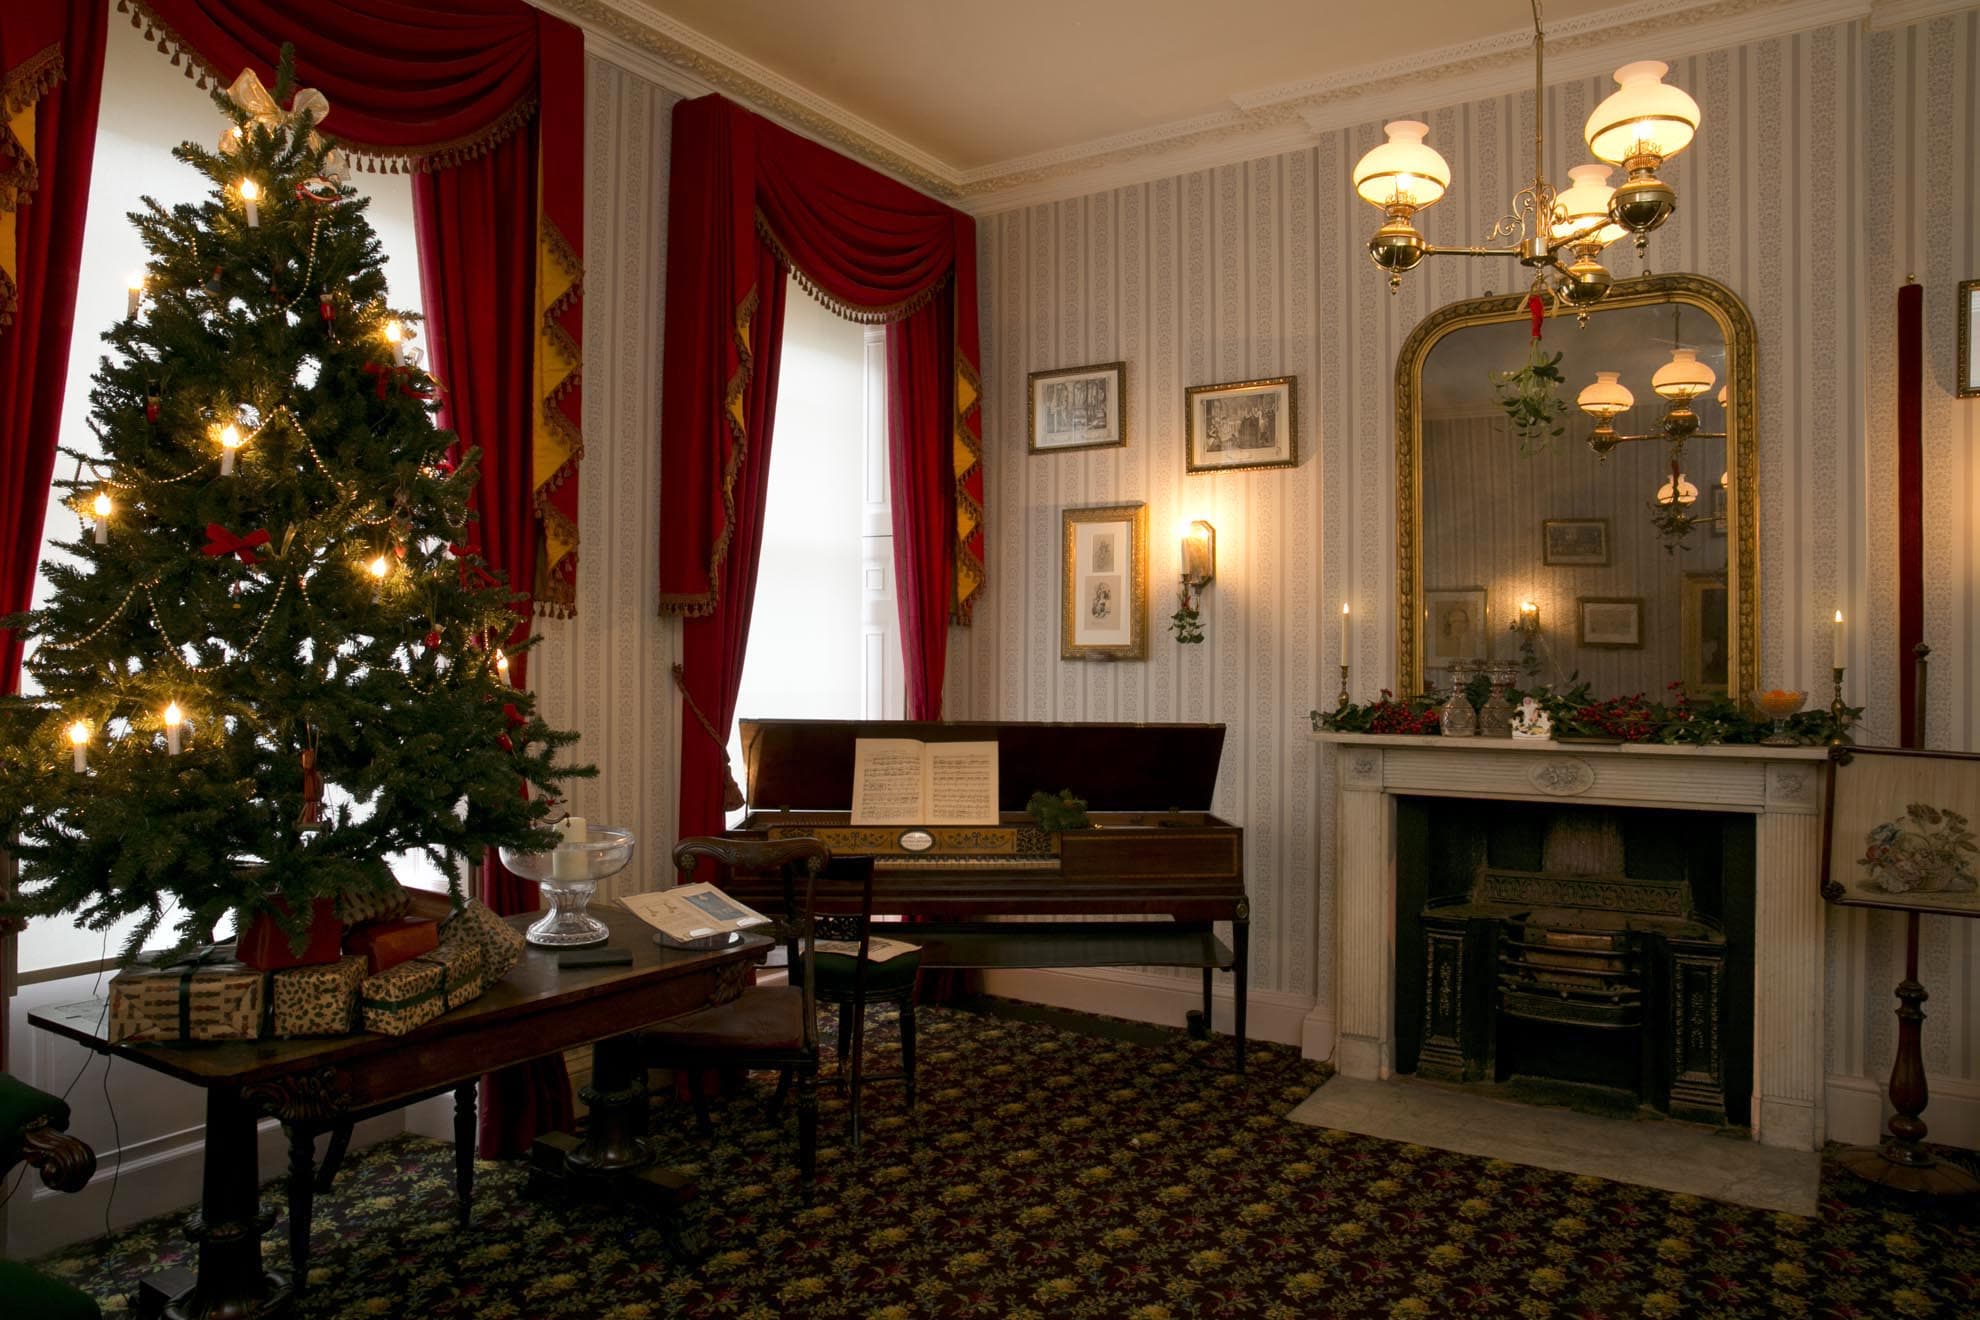 Christmas Drawing Room at 48 Doughty Street